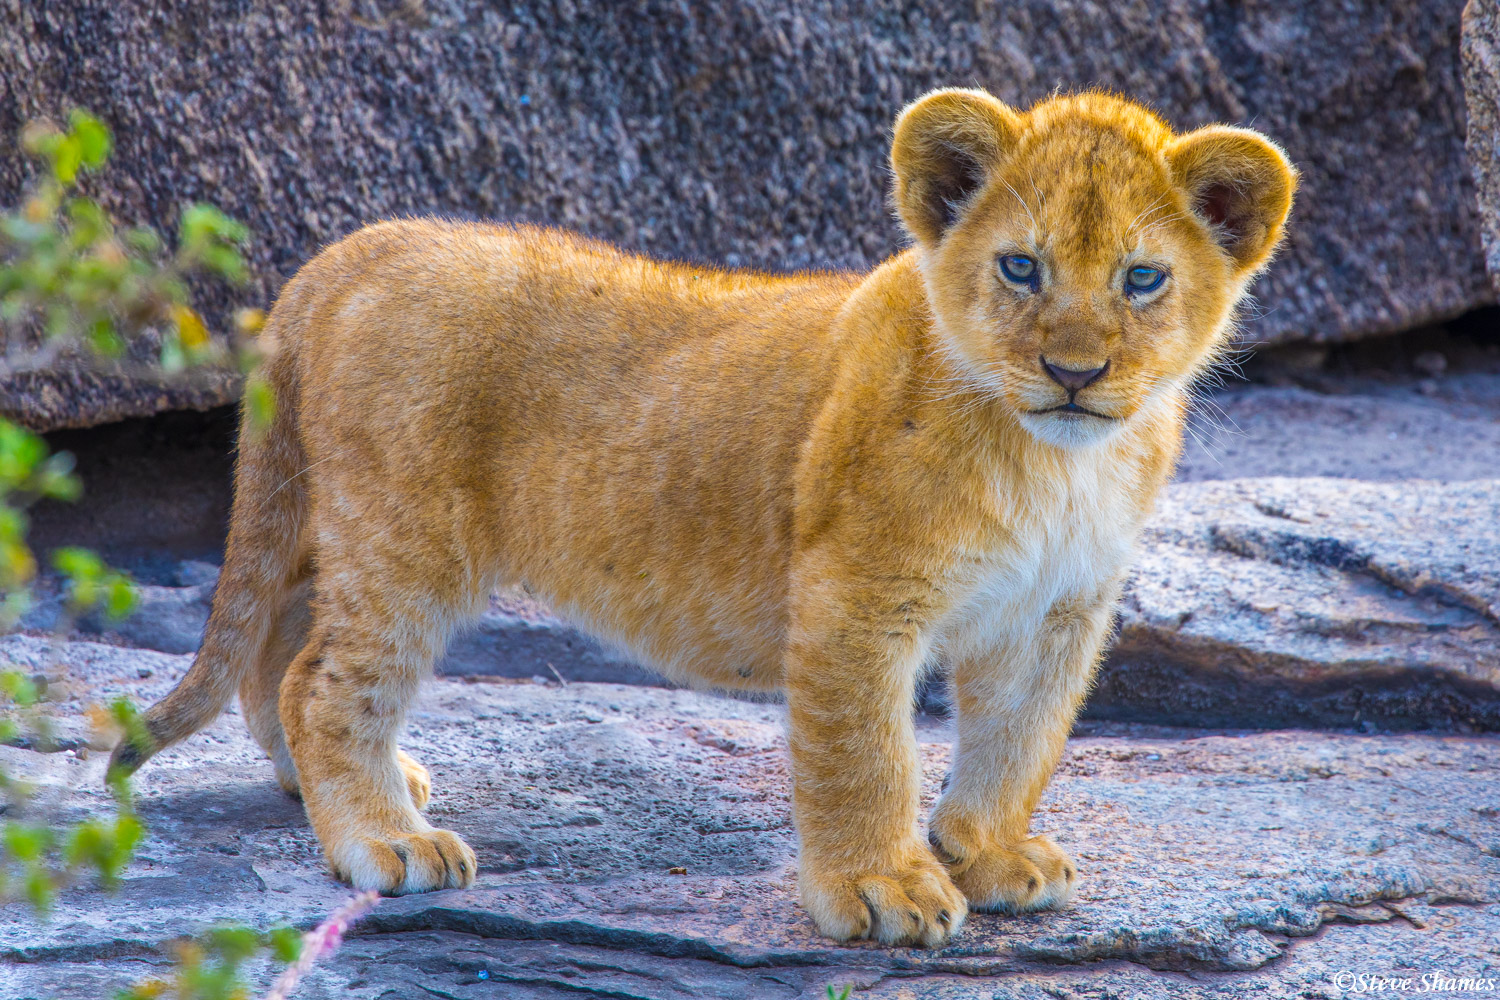 And here we have a possible future lion king -- or queen. Can't tell if this is a male or female.